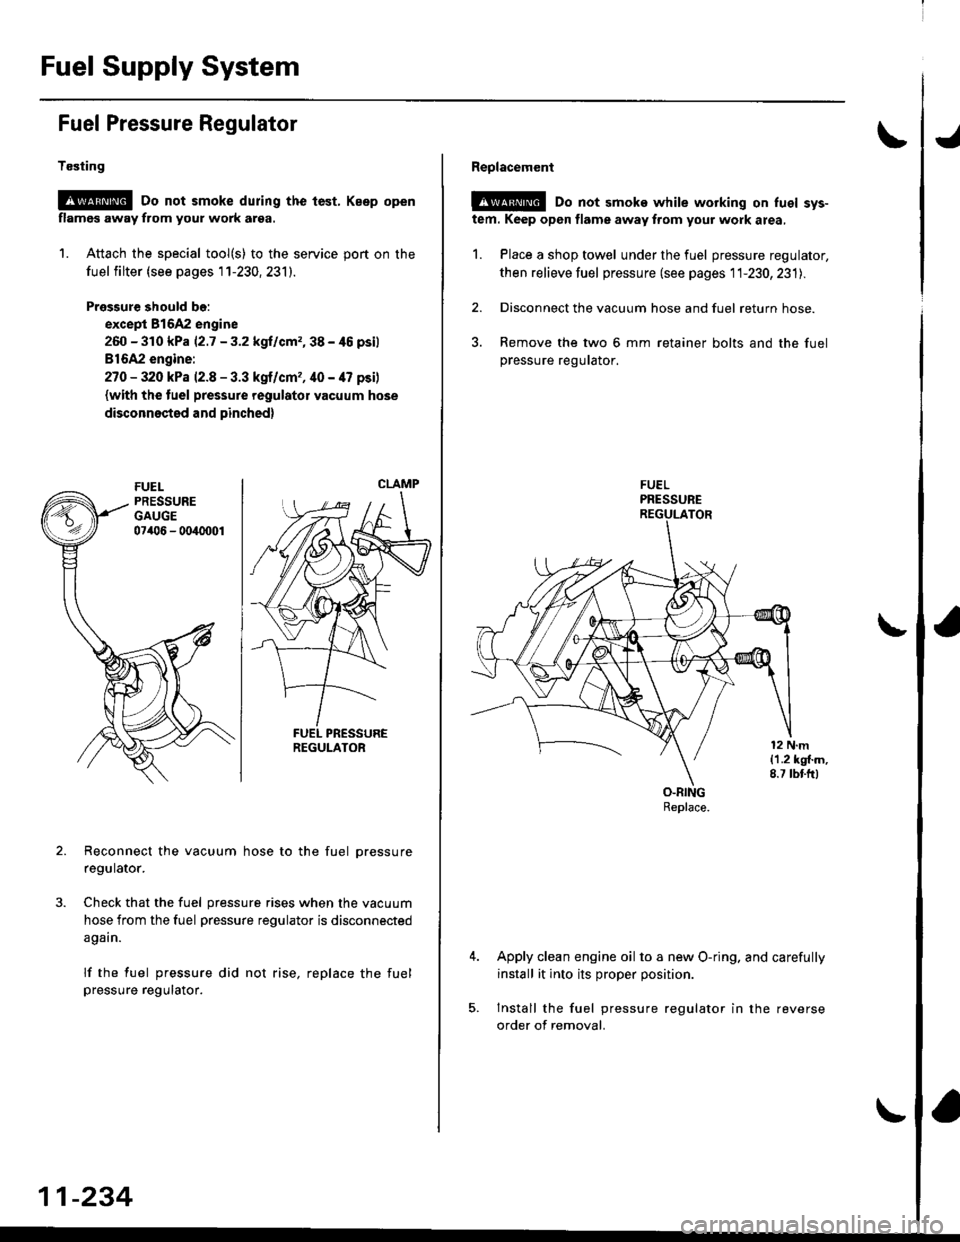 HONDA CIVIC 1999 6.G User Guide Fuel Supply System
Fuel Pressure Regulator
Te3ting
@ Do not smoke during the tast. Keep open
flamcs away from your work arsa.
1. Attach the special tool(s) to the service port on the
fuel filter (see 